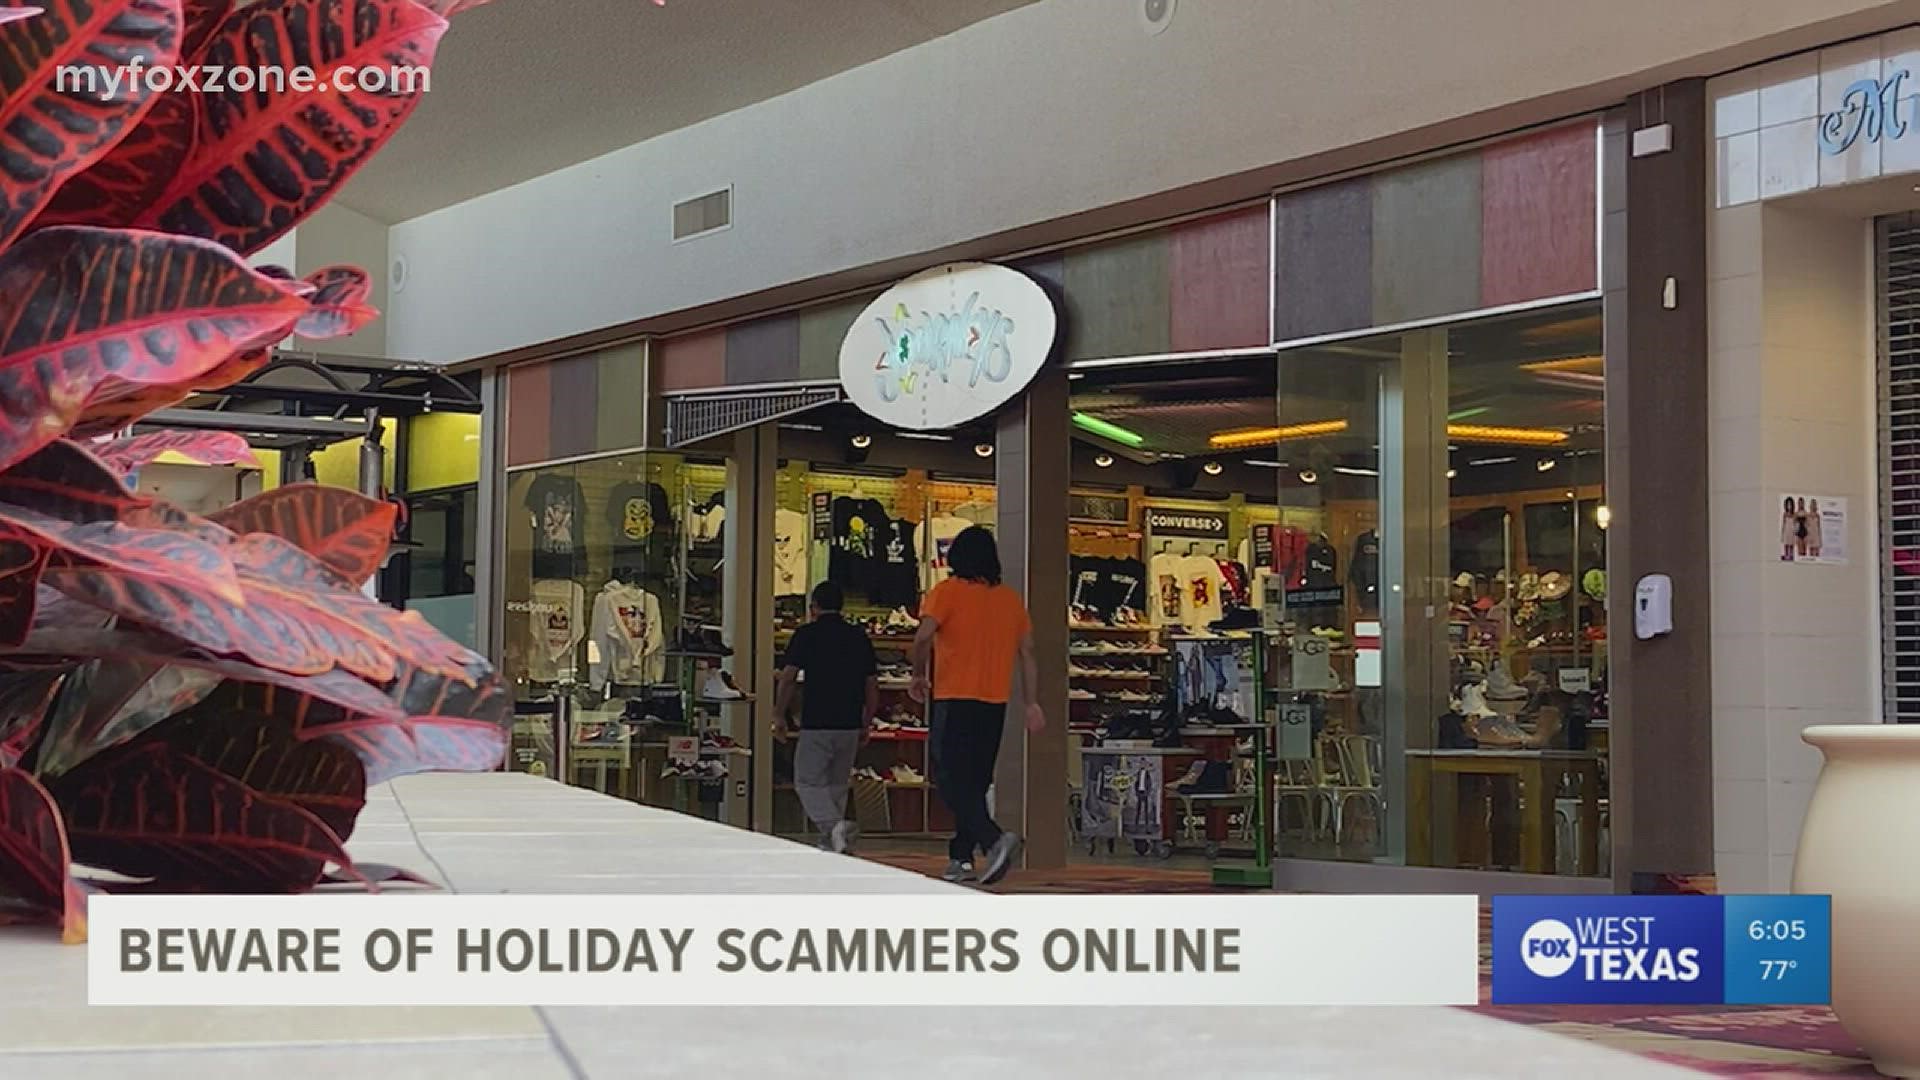 The holiday season is the perfect time for scammers to trick online shoppers.